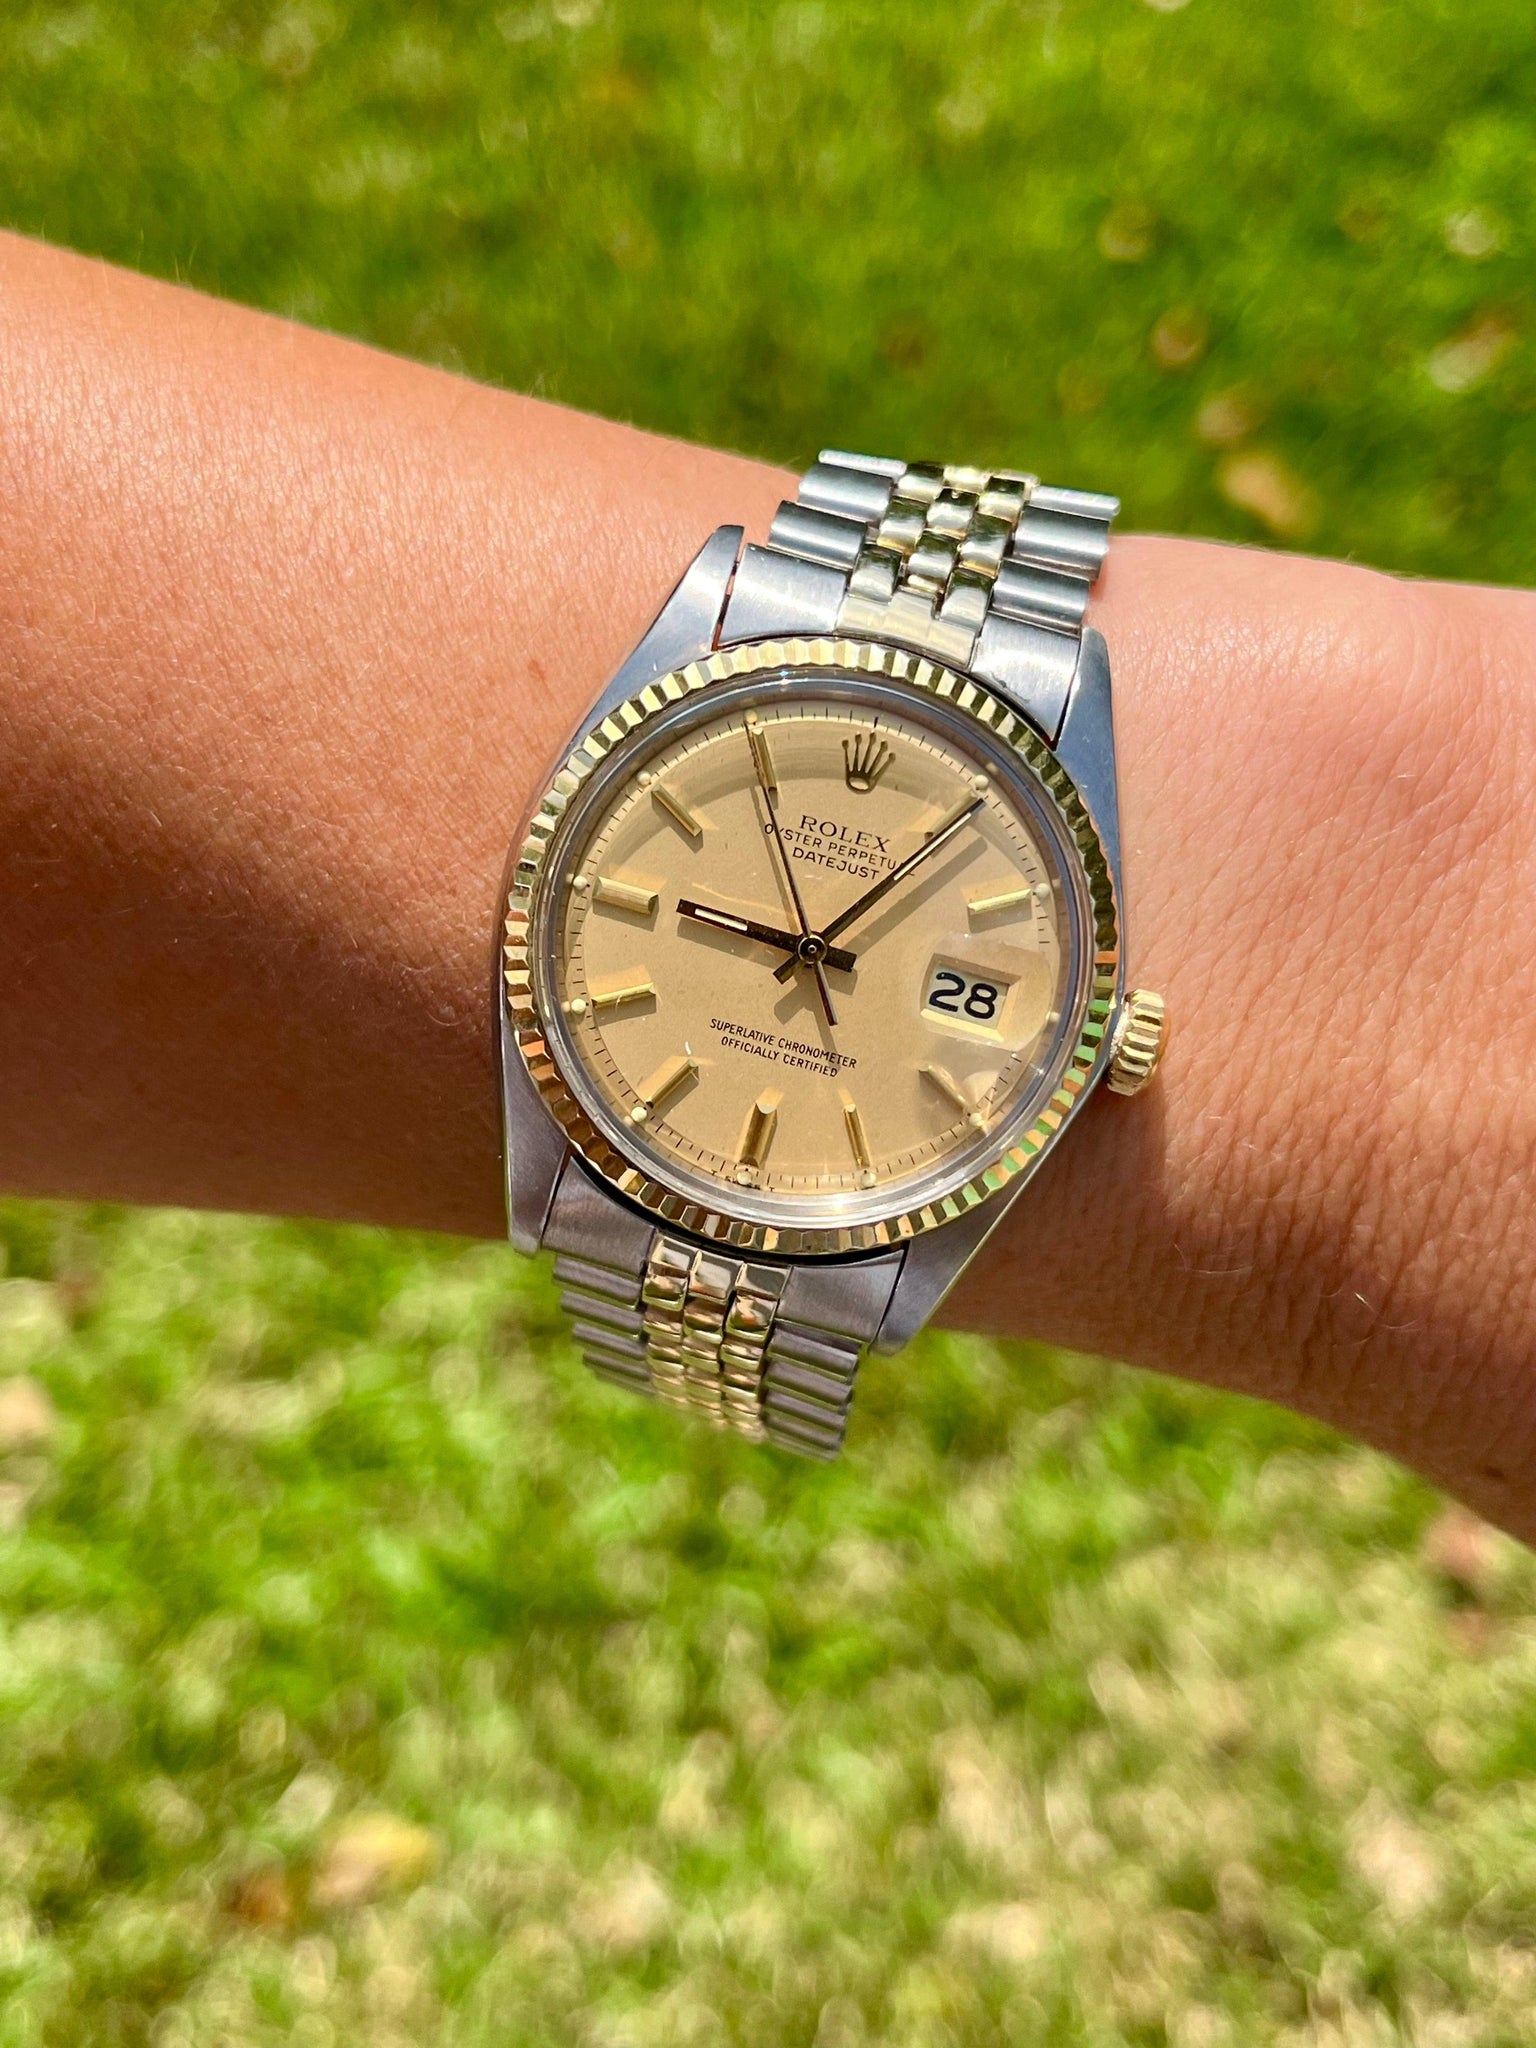 Vintage Rolex Datejust Ref. 1601 Two Tone Watch With Jubilee Bracelet-Watches-ASSAY